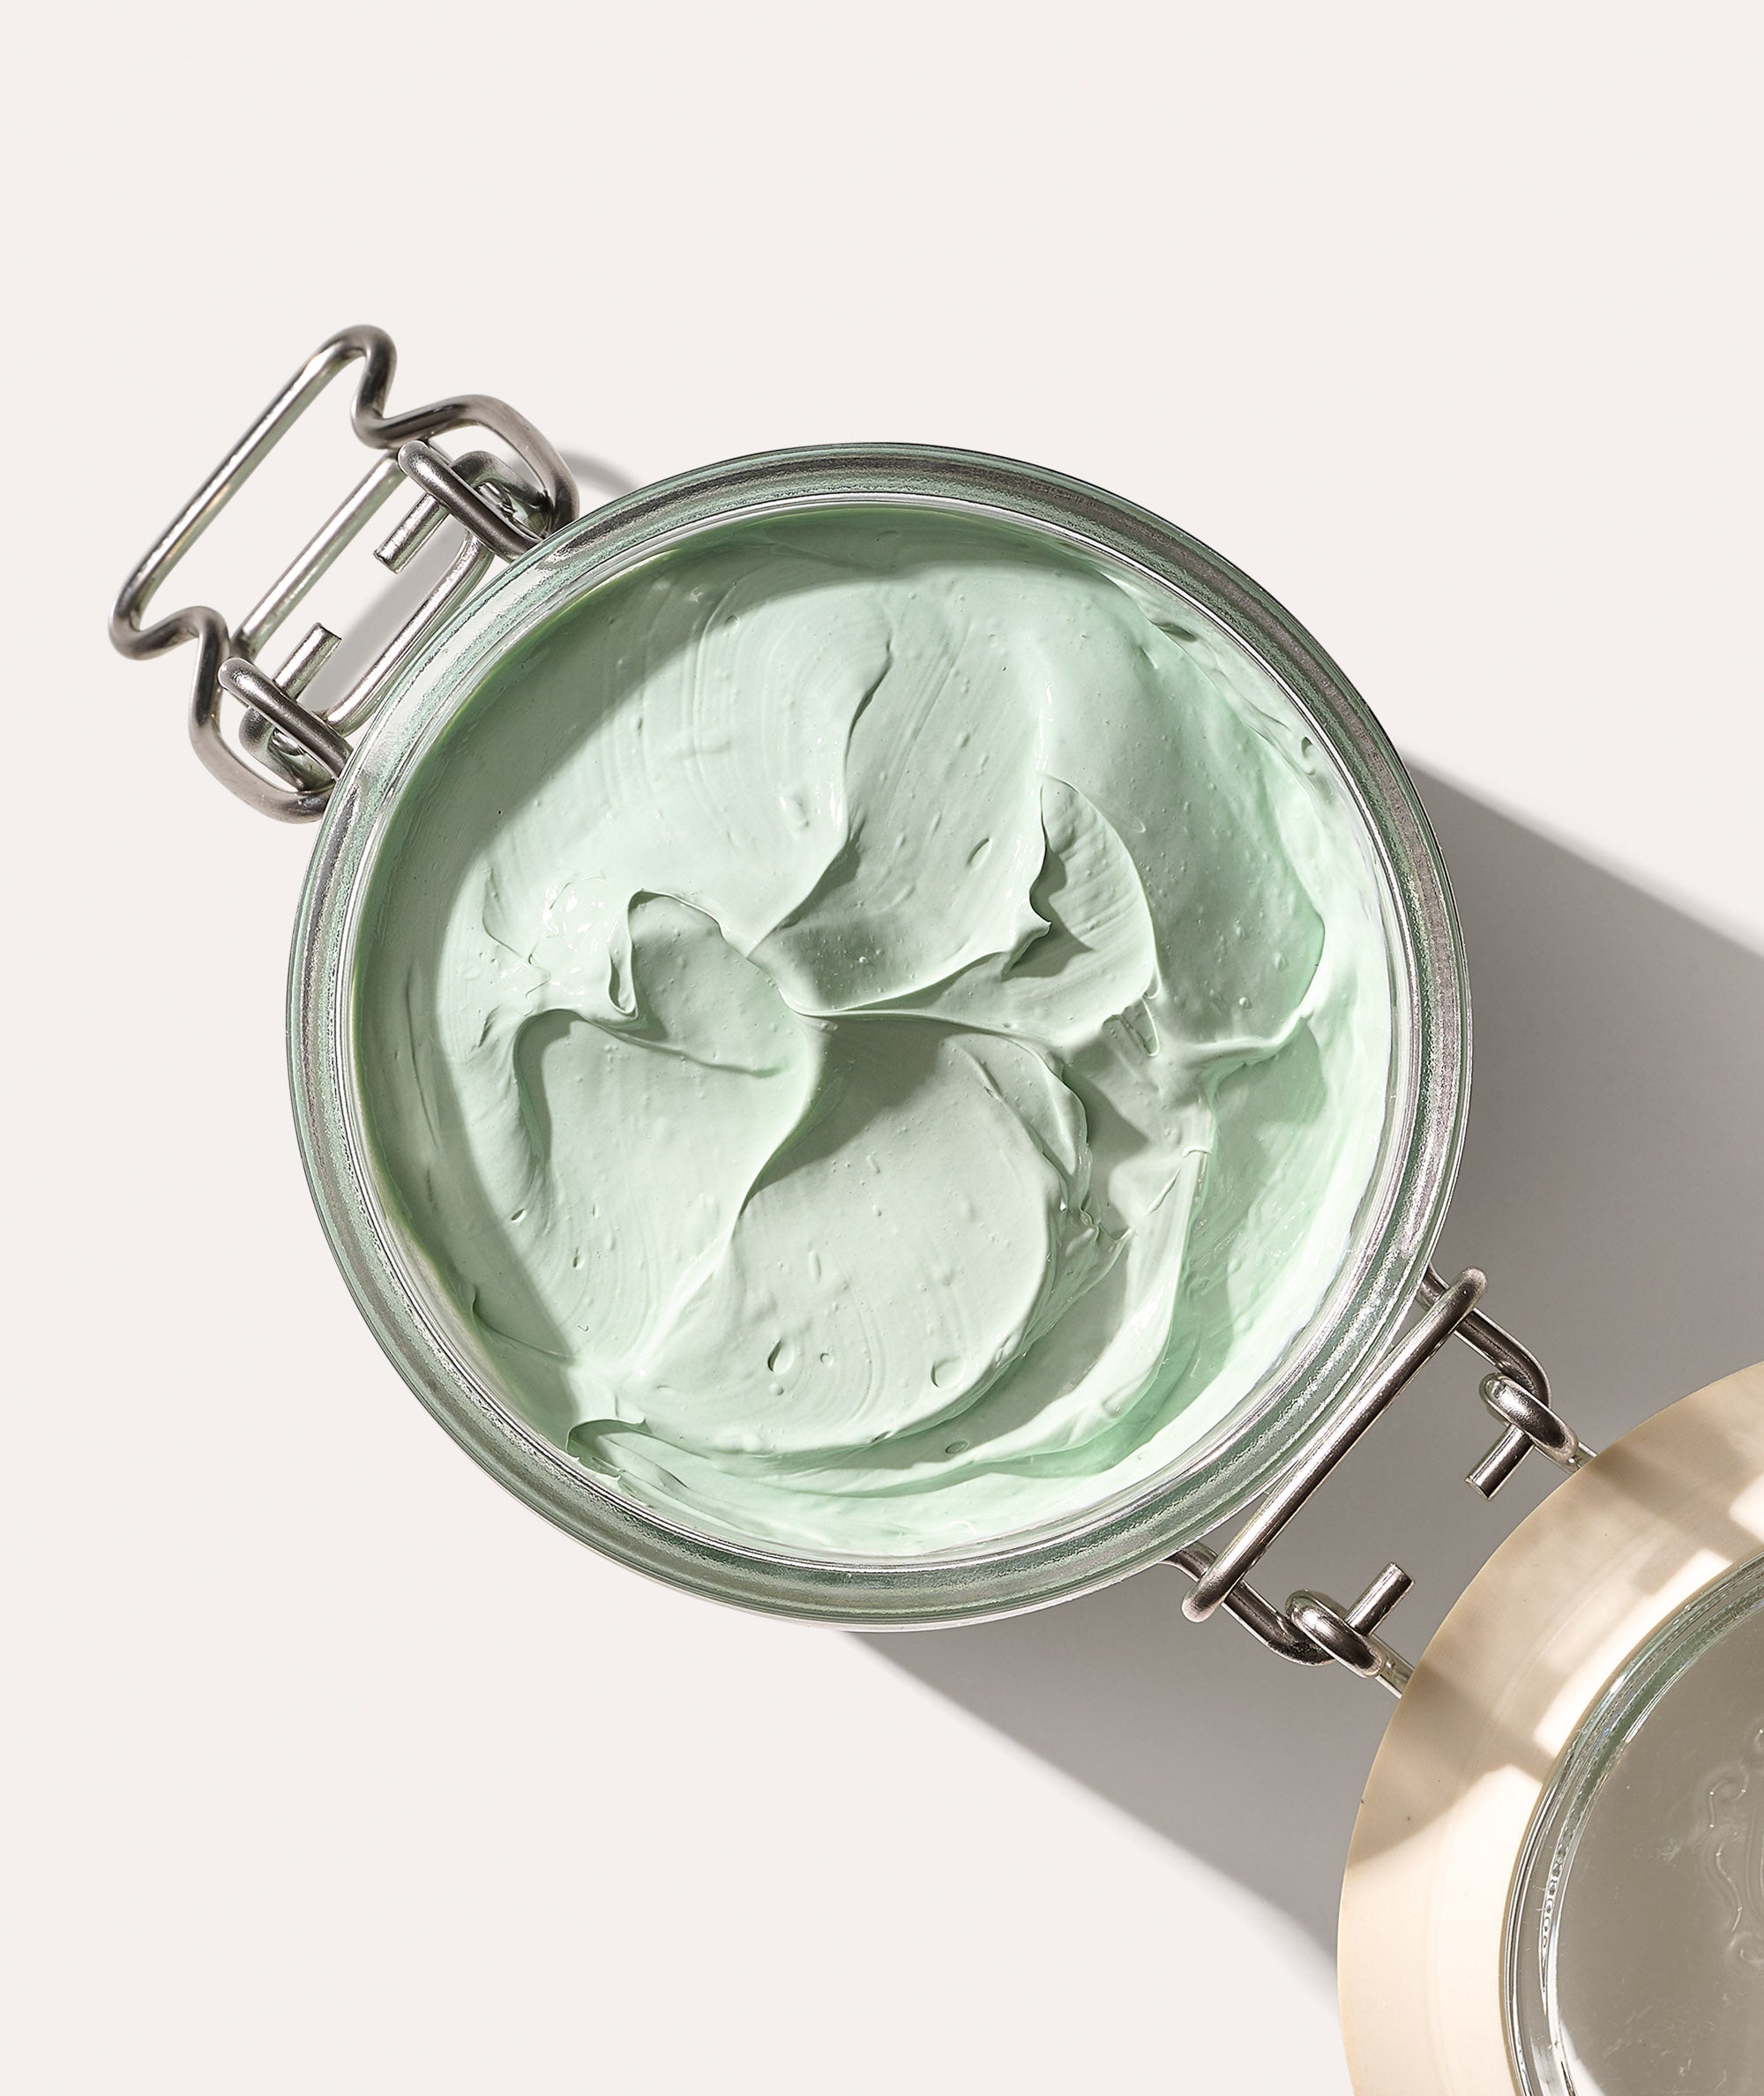 Picture of opened Advanced Fango Delicato Moisturizing Mud Mask 7.5 oz glass jar to see mud mask texture